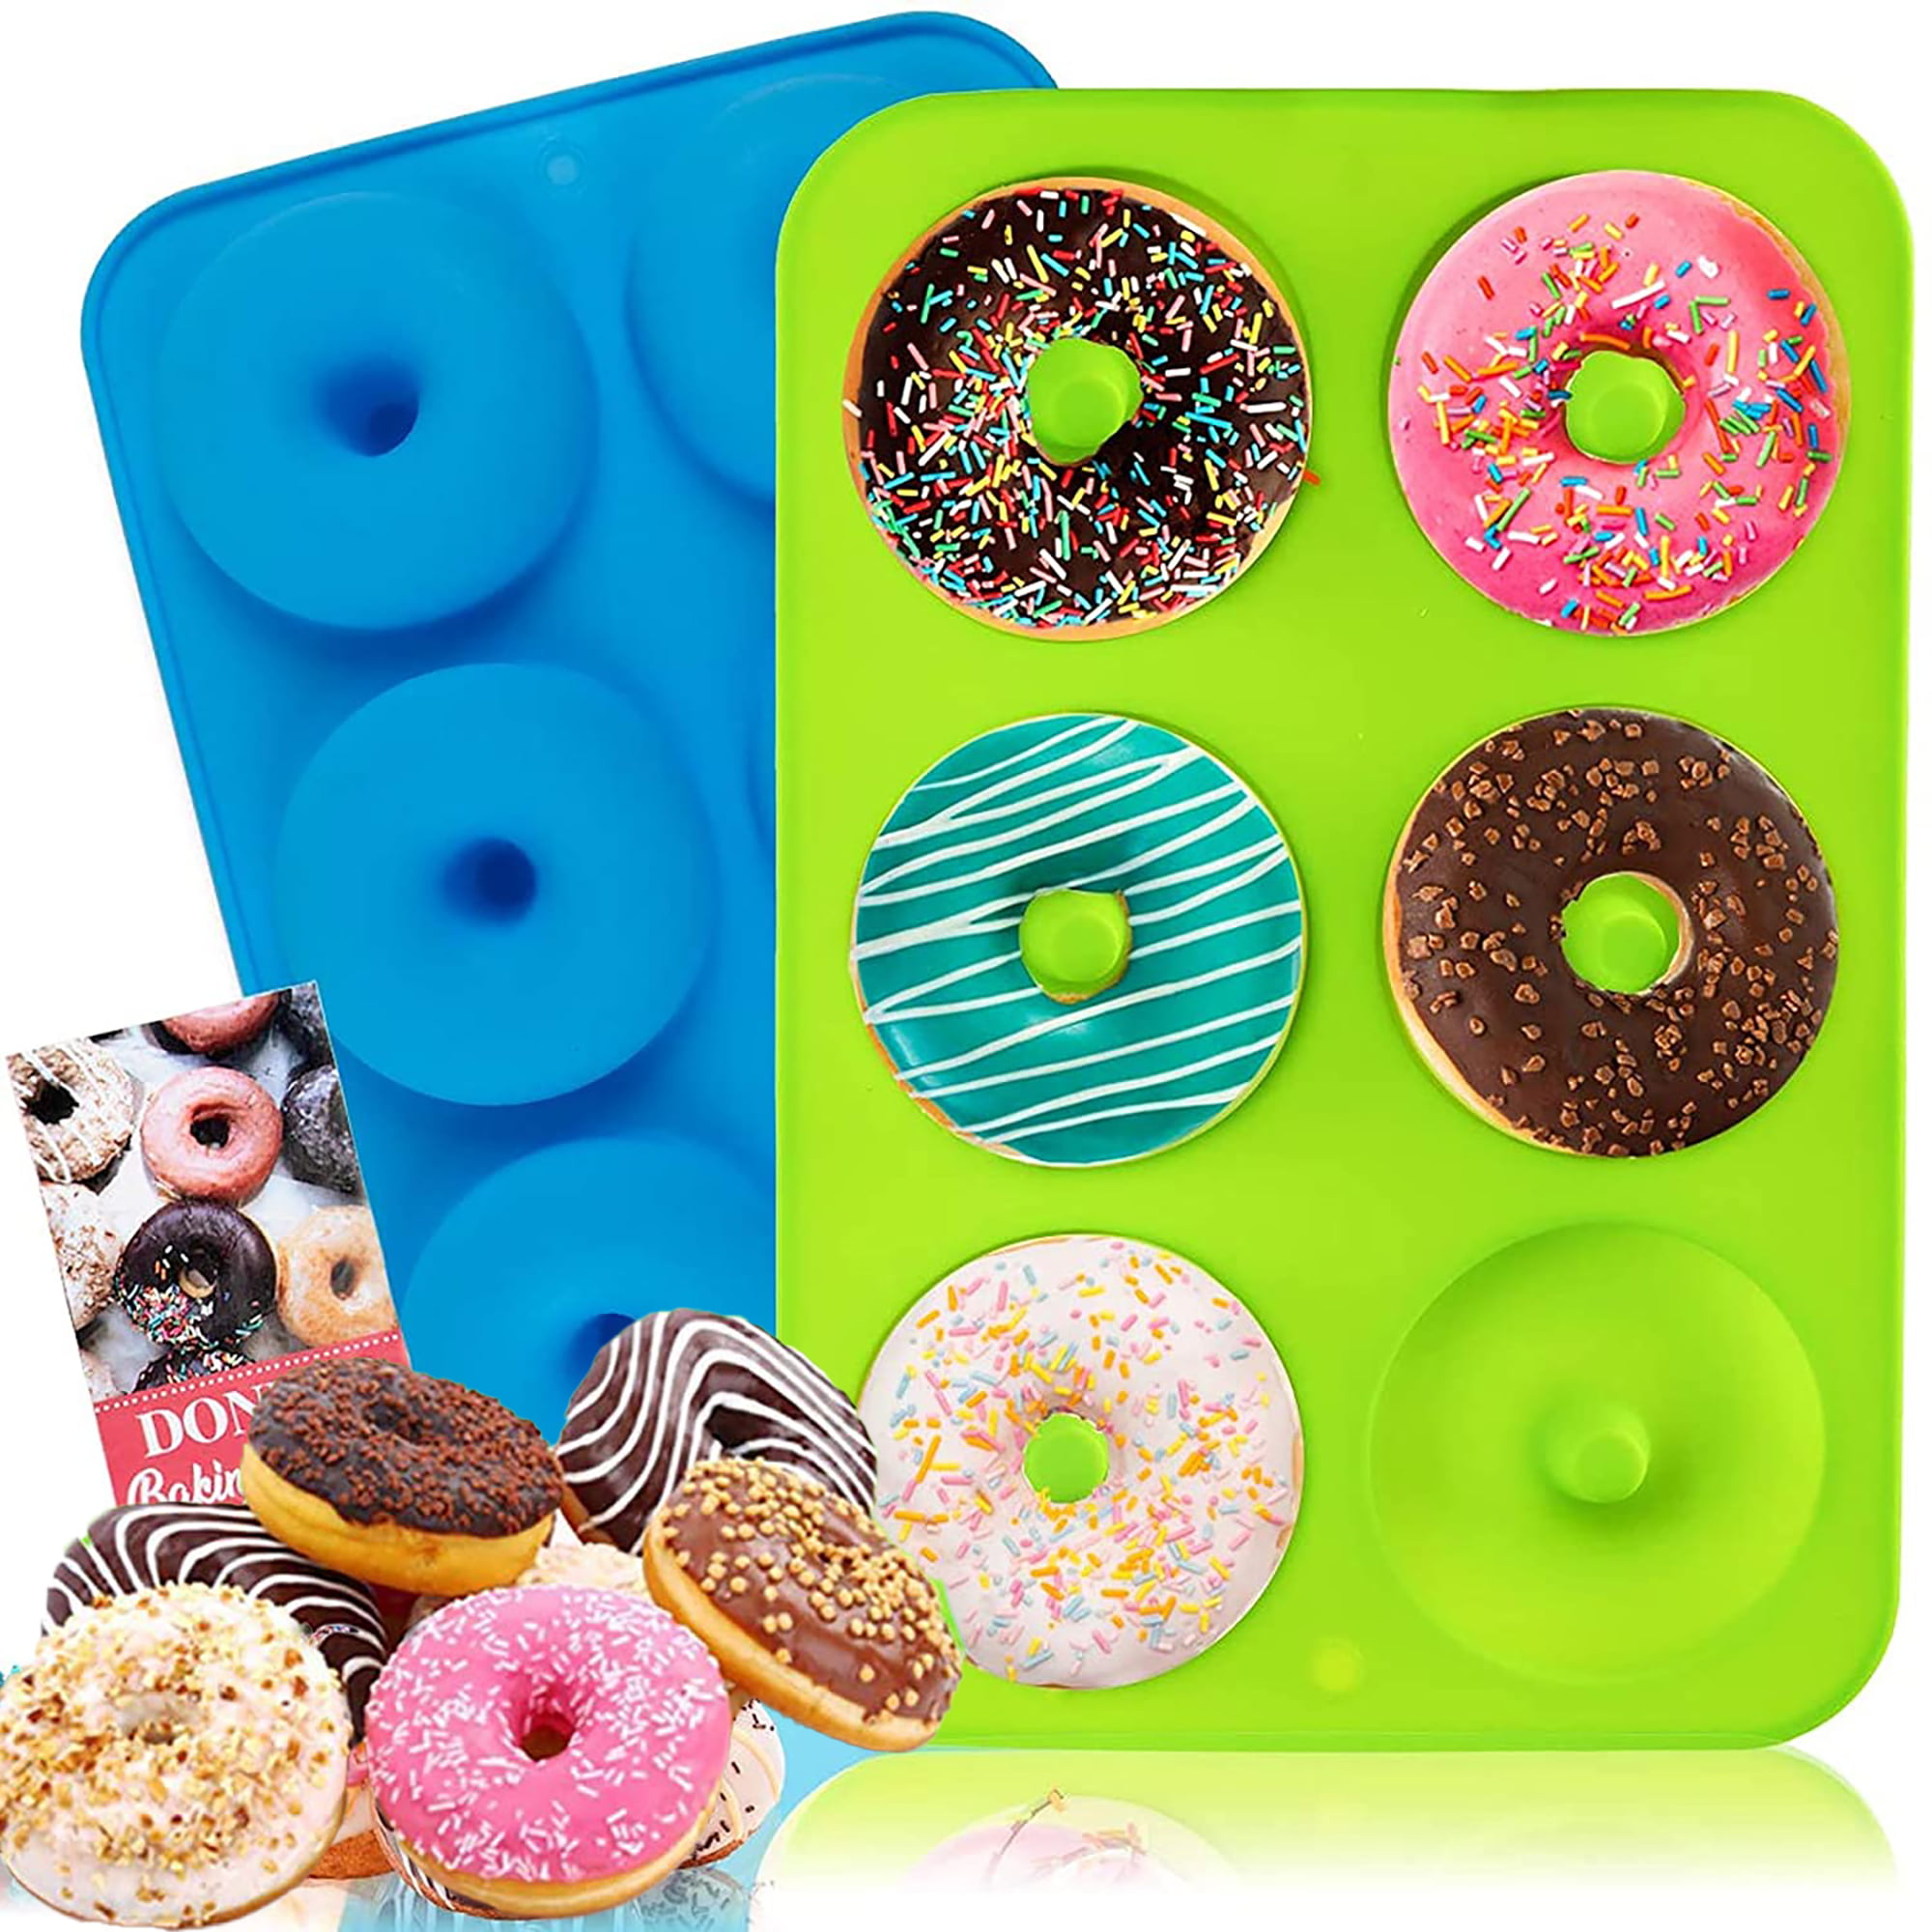 BiaoGan Silicone Donut Baking Pans 6-Cavity Silicone Donut Baking Trays for 3 Inch Doughnuts Red, Green, Blue 3 Pack Non-Stick Silicone Donut Molds Bagels 